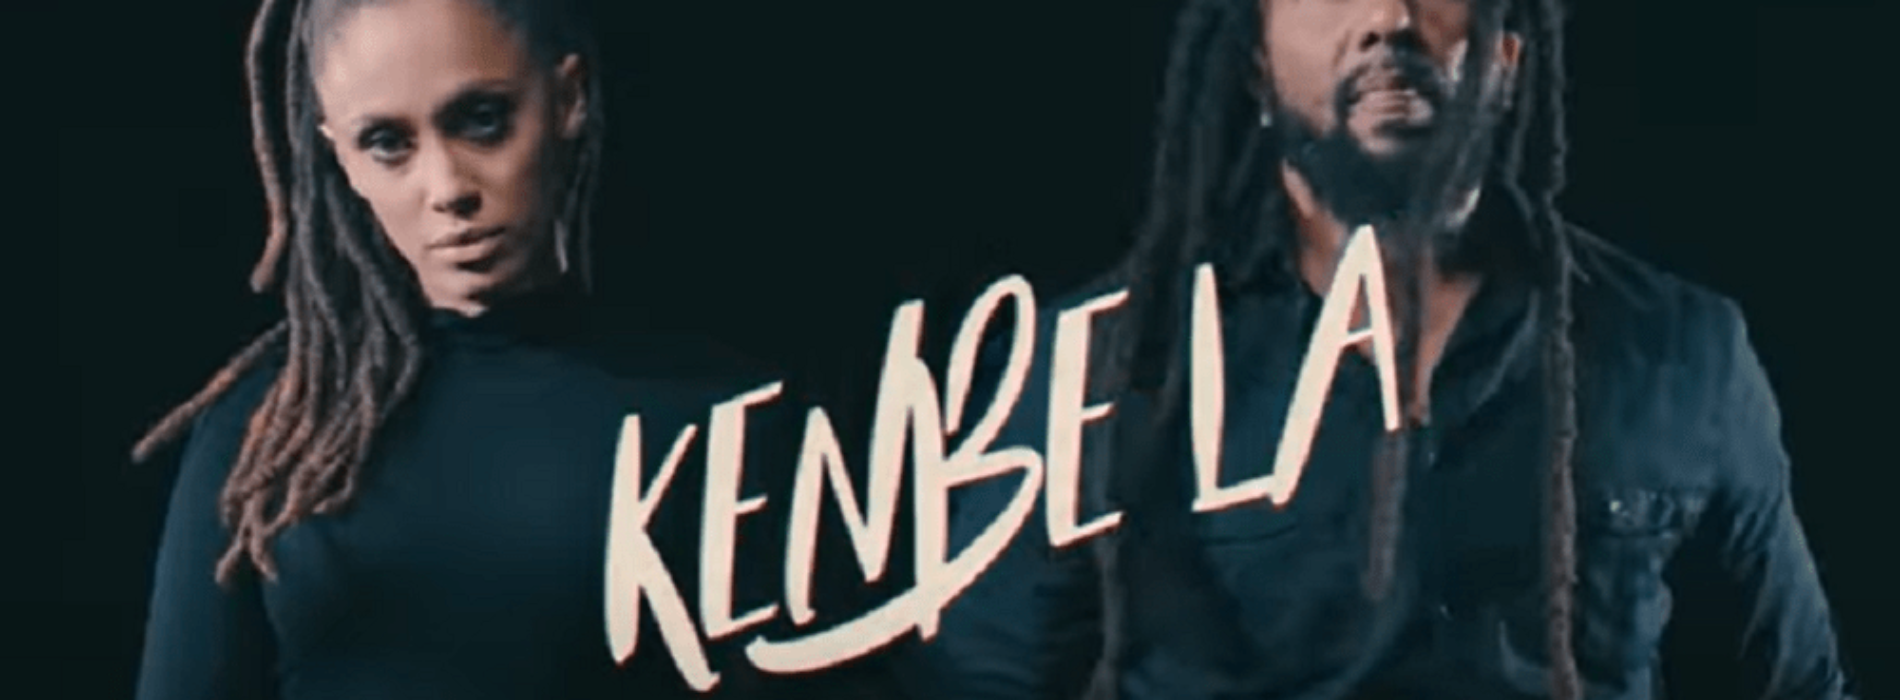 Phyllisia Ross & Ky-Mani Marley – KENBE LA Official Video – Janvier 2022🇭🇹 ❤️ 🇯🇲